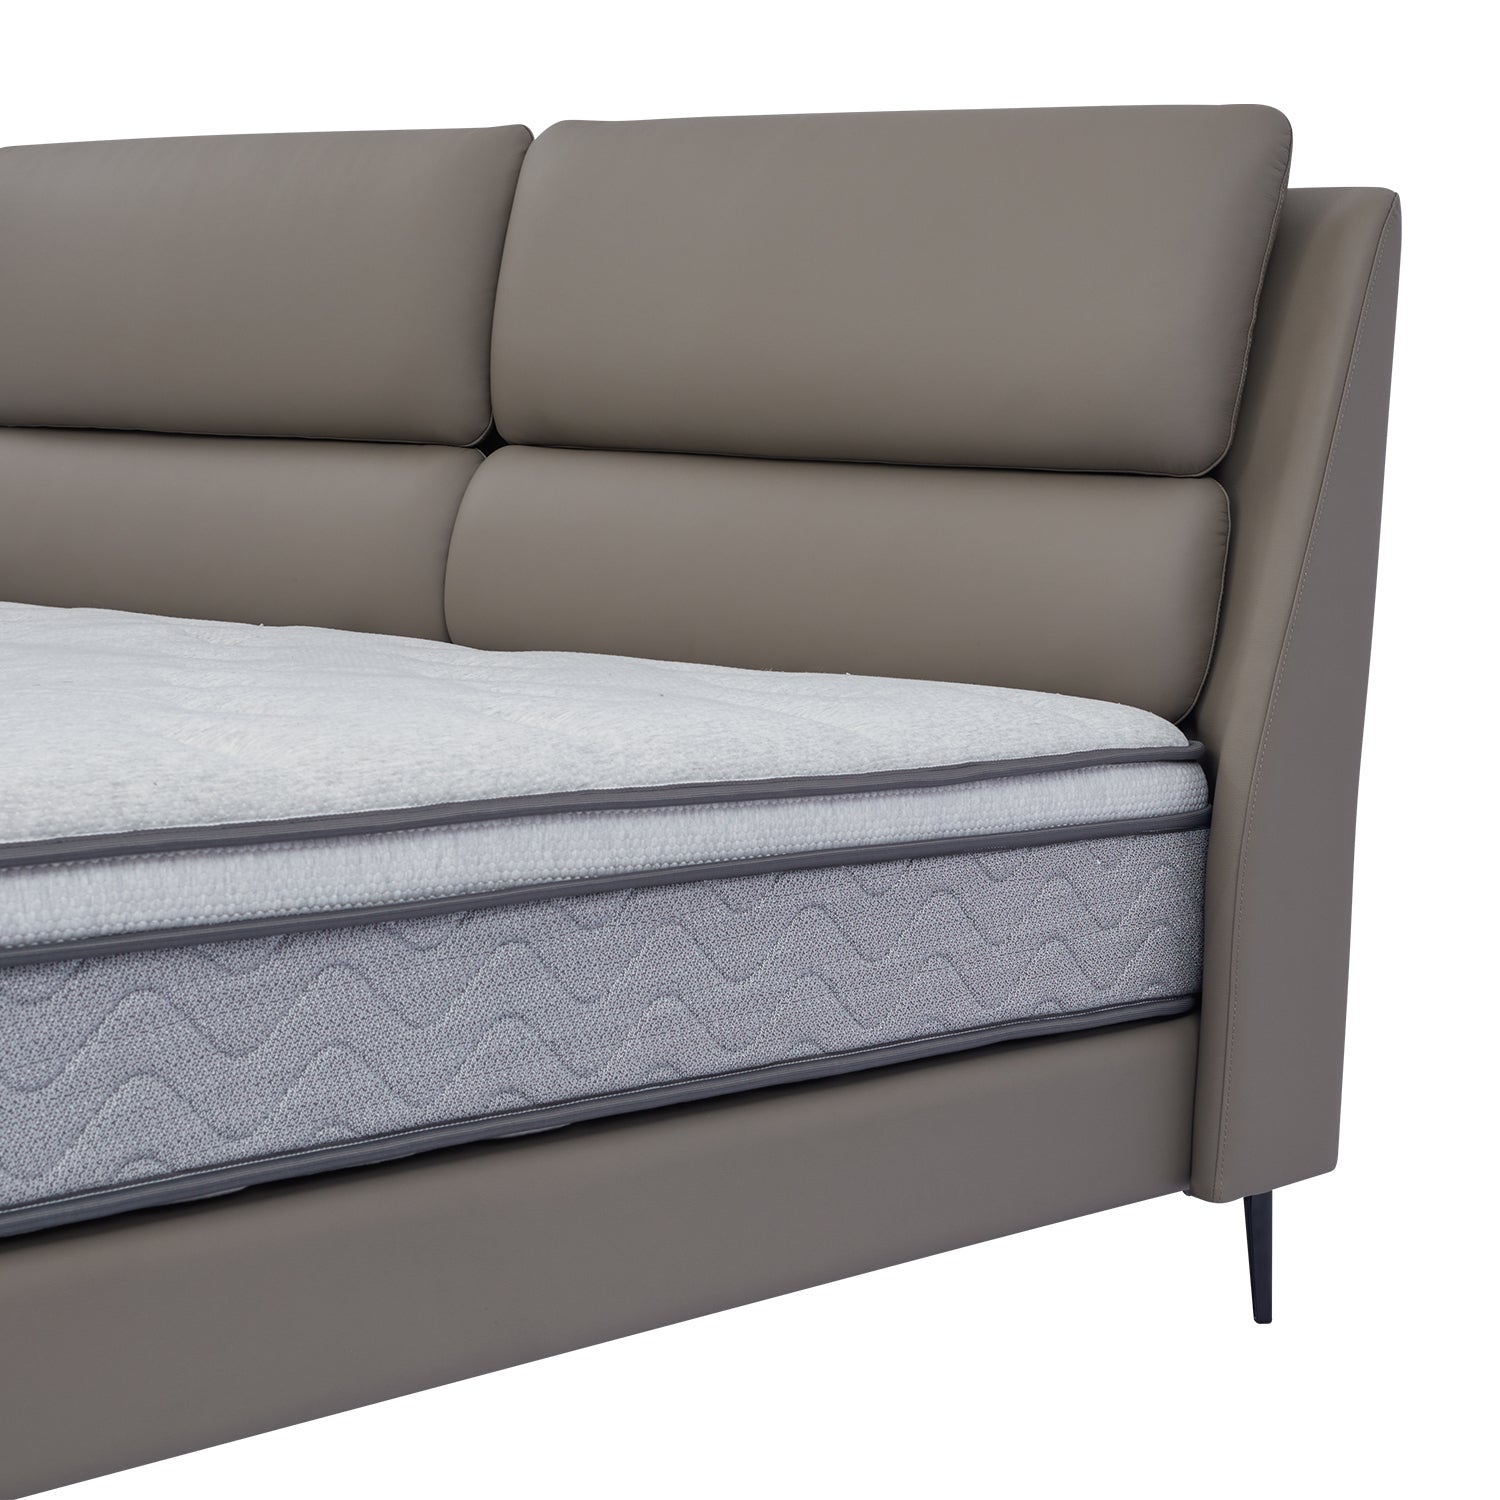 Close-up view of DeRUCCI Bed Frame BOC1 - 019 with grey padded headboard and mattress, showcasing modern design and comfort